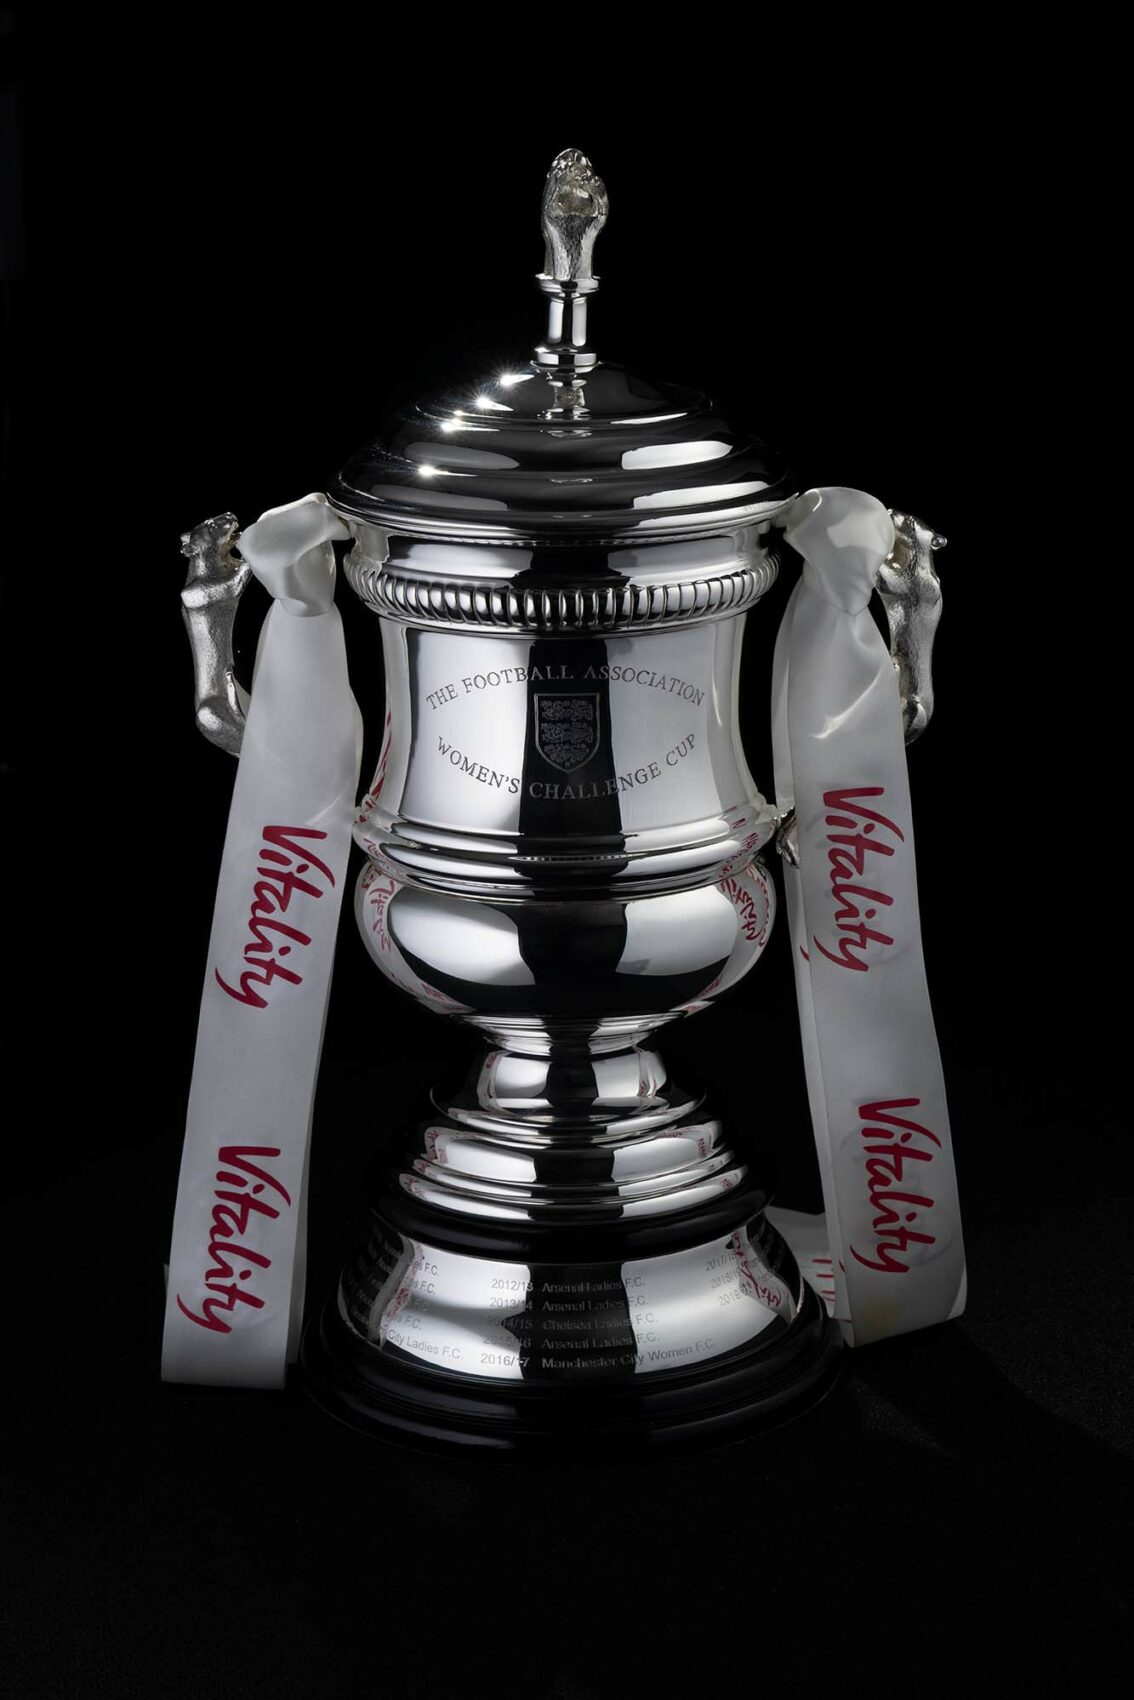 Puno Fantasía Confiar Designers and Makers of the Women's FA Cup - Thomas Lyte